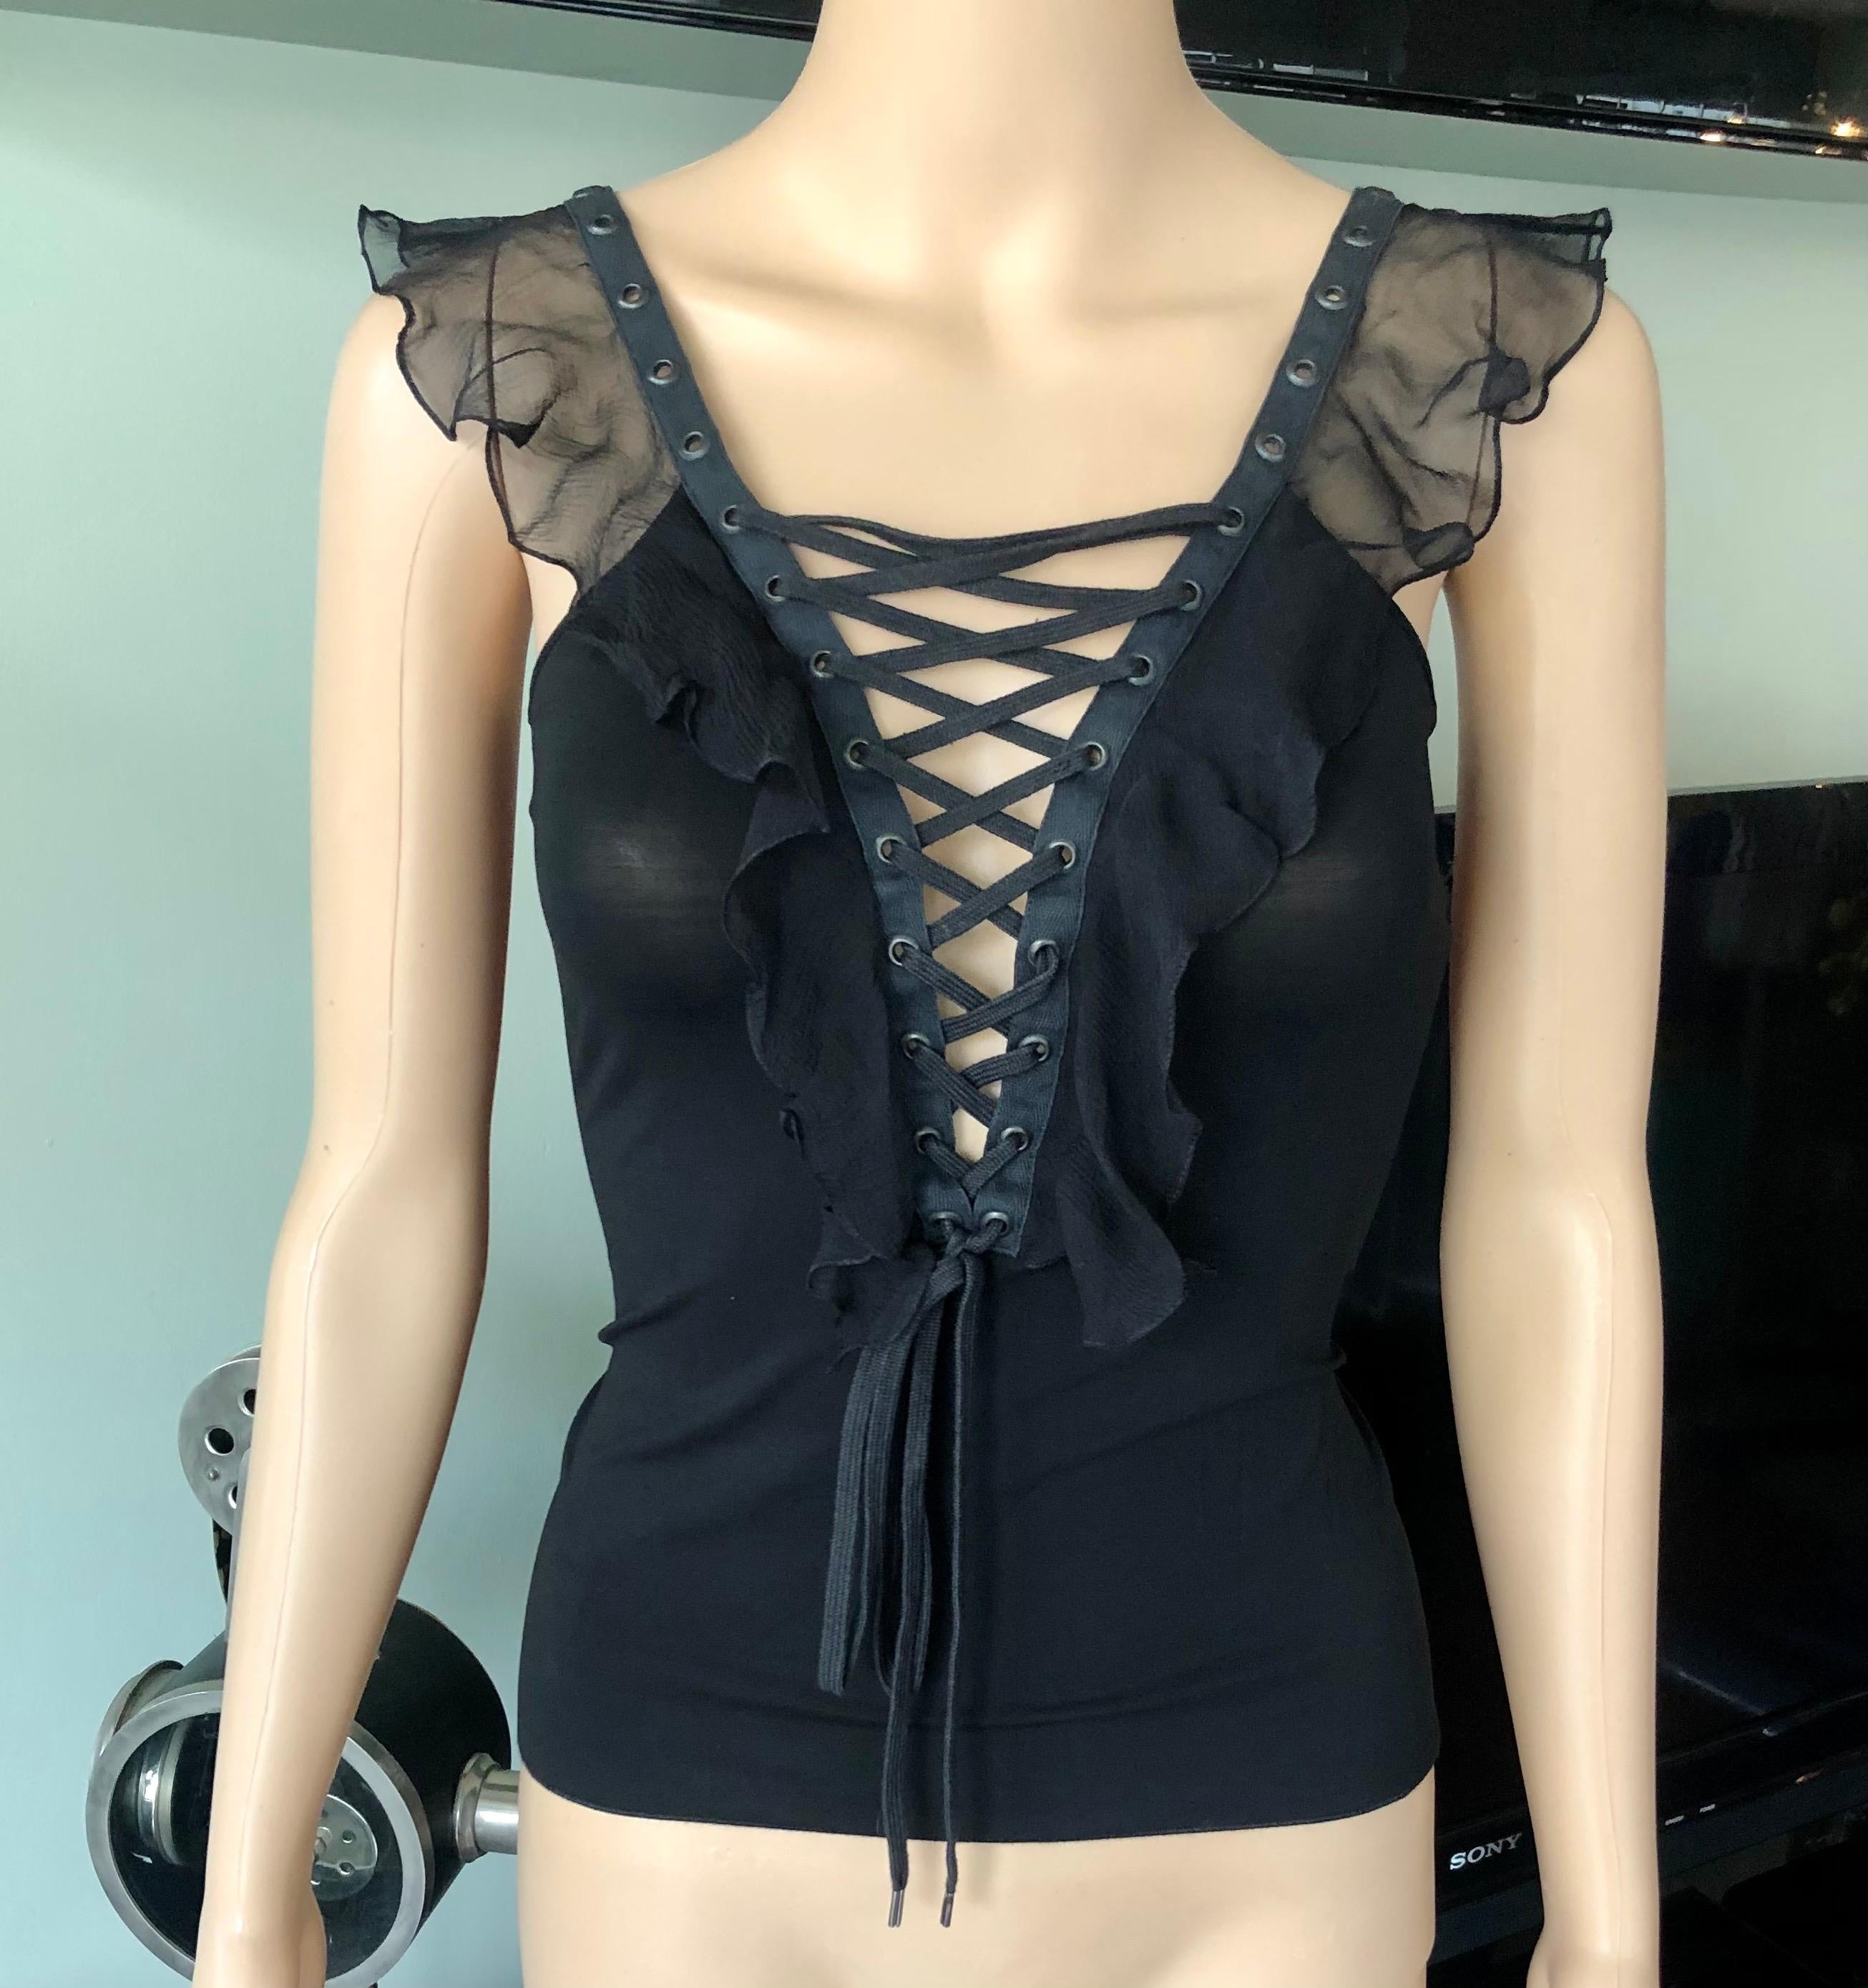 Christian Dior By John Galliano S/S 2003 Plunging Lace Up Tie Up Black Top In Good Condition For Sale In Naples, FL